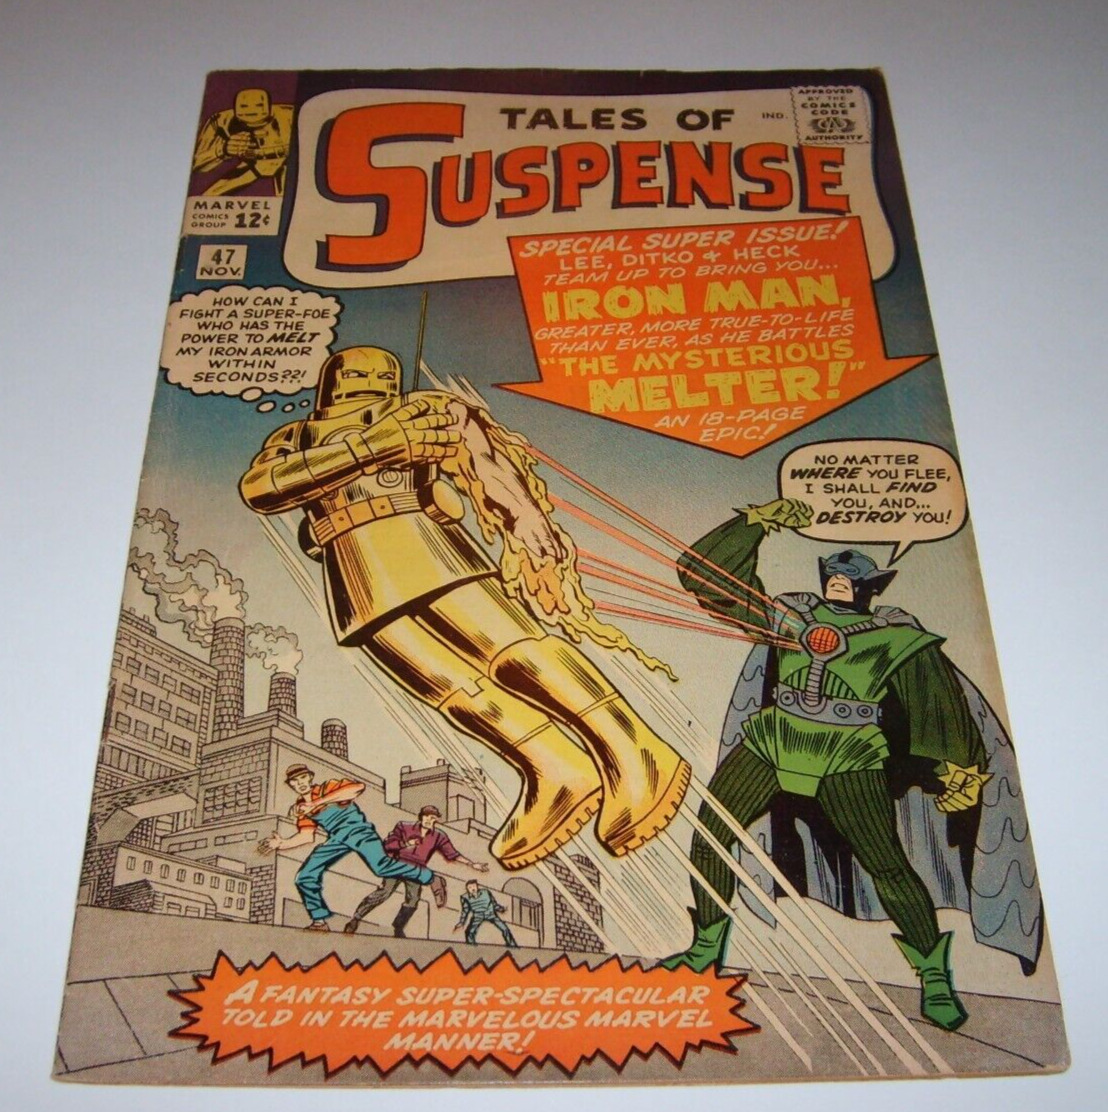 TALES OF SUSPENSE #47 MARVEL 1ST APPEARANCE OF MELTER EARLY IRON MAN